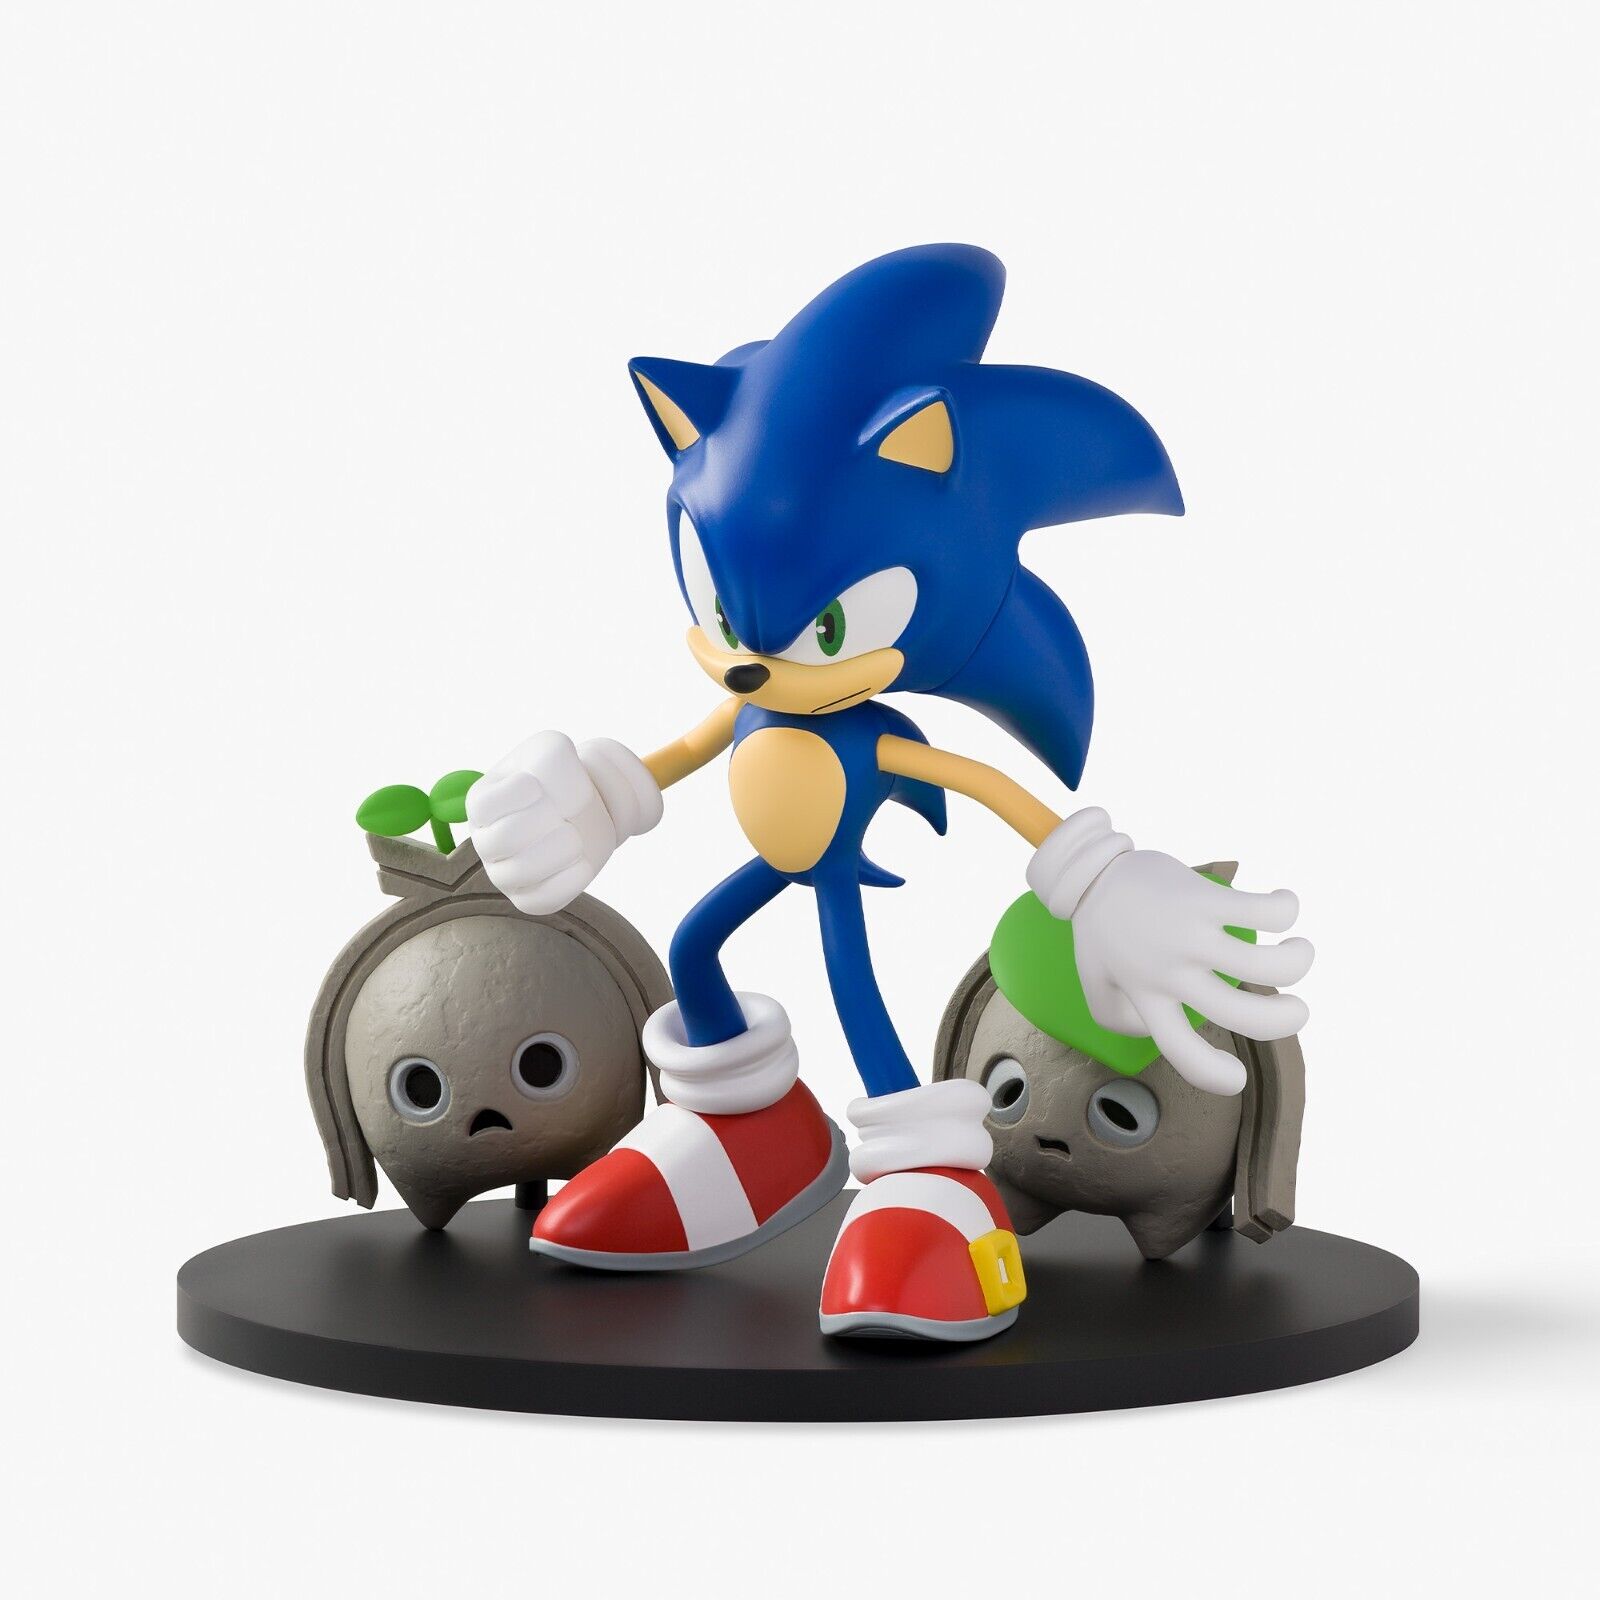 Sega Sonic the Hedgehog Anime Game Figure Statue Toy Sonic Frontiers SG53783